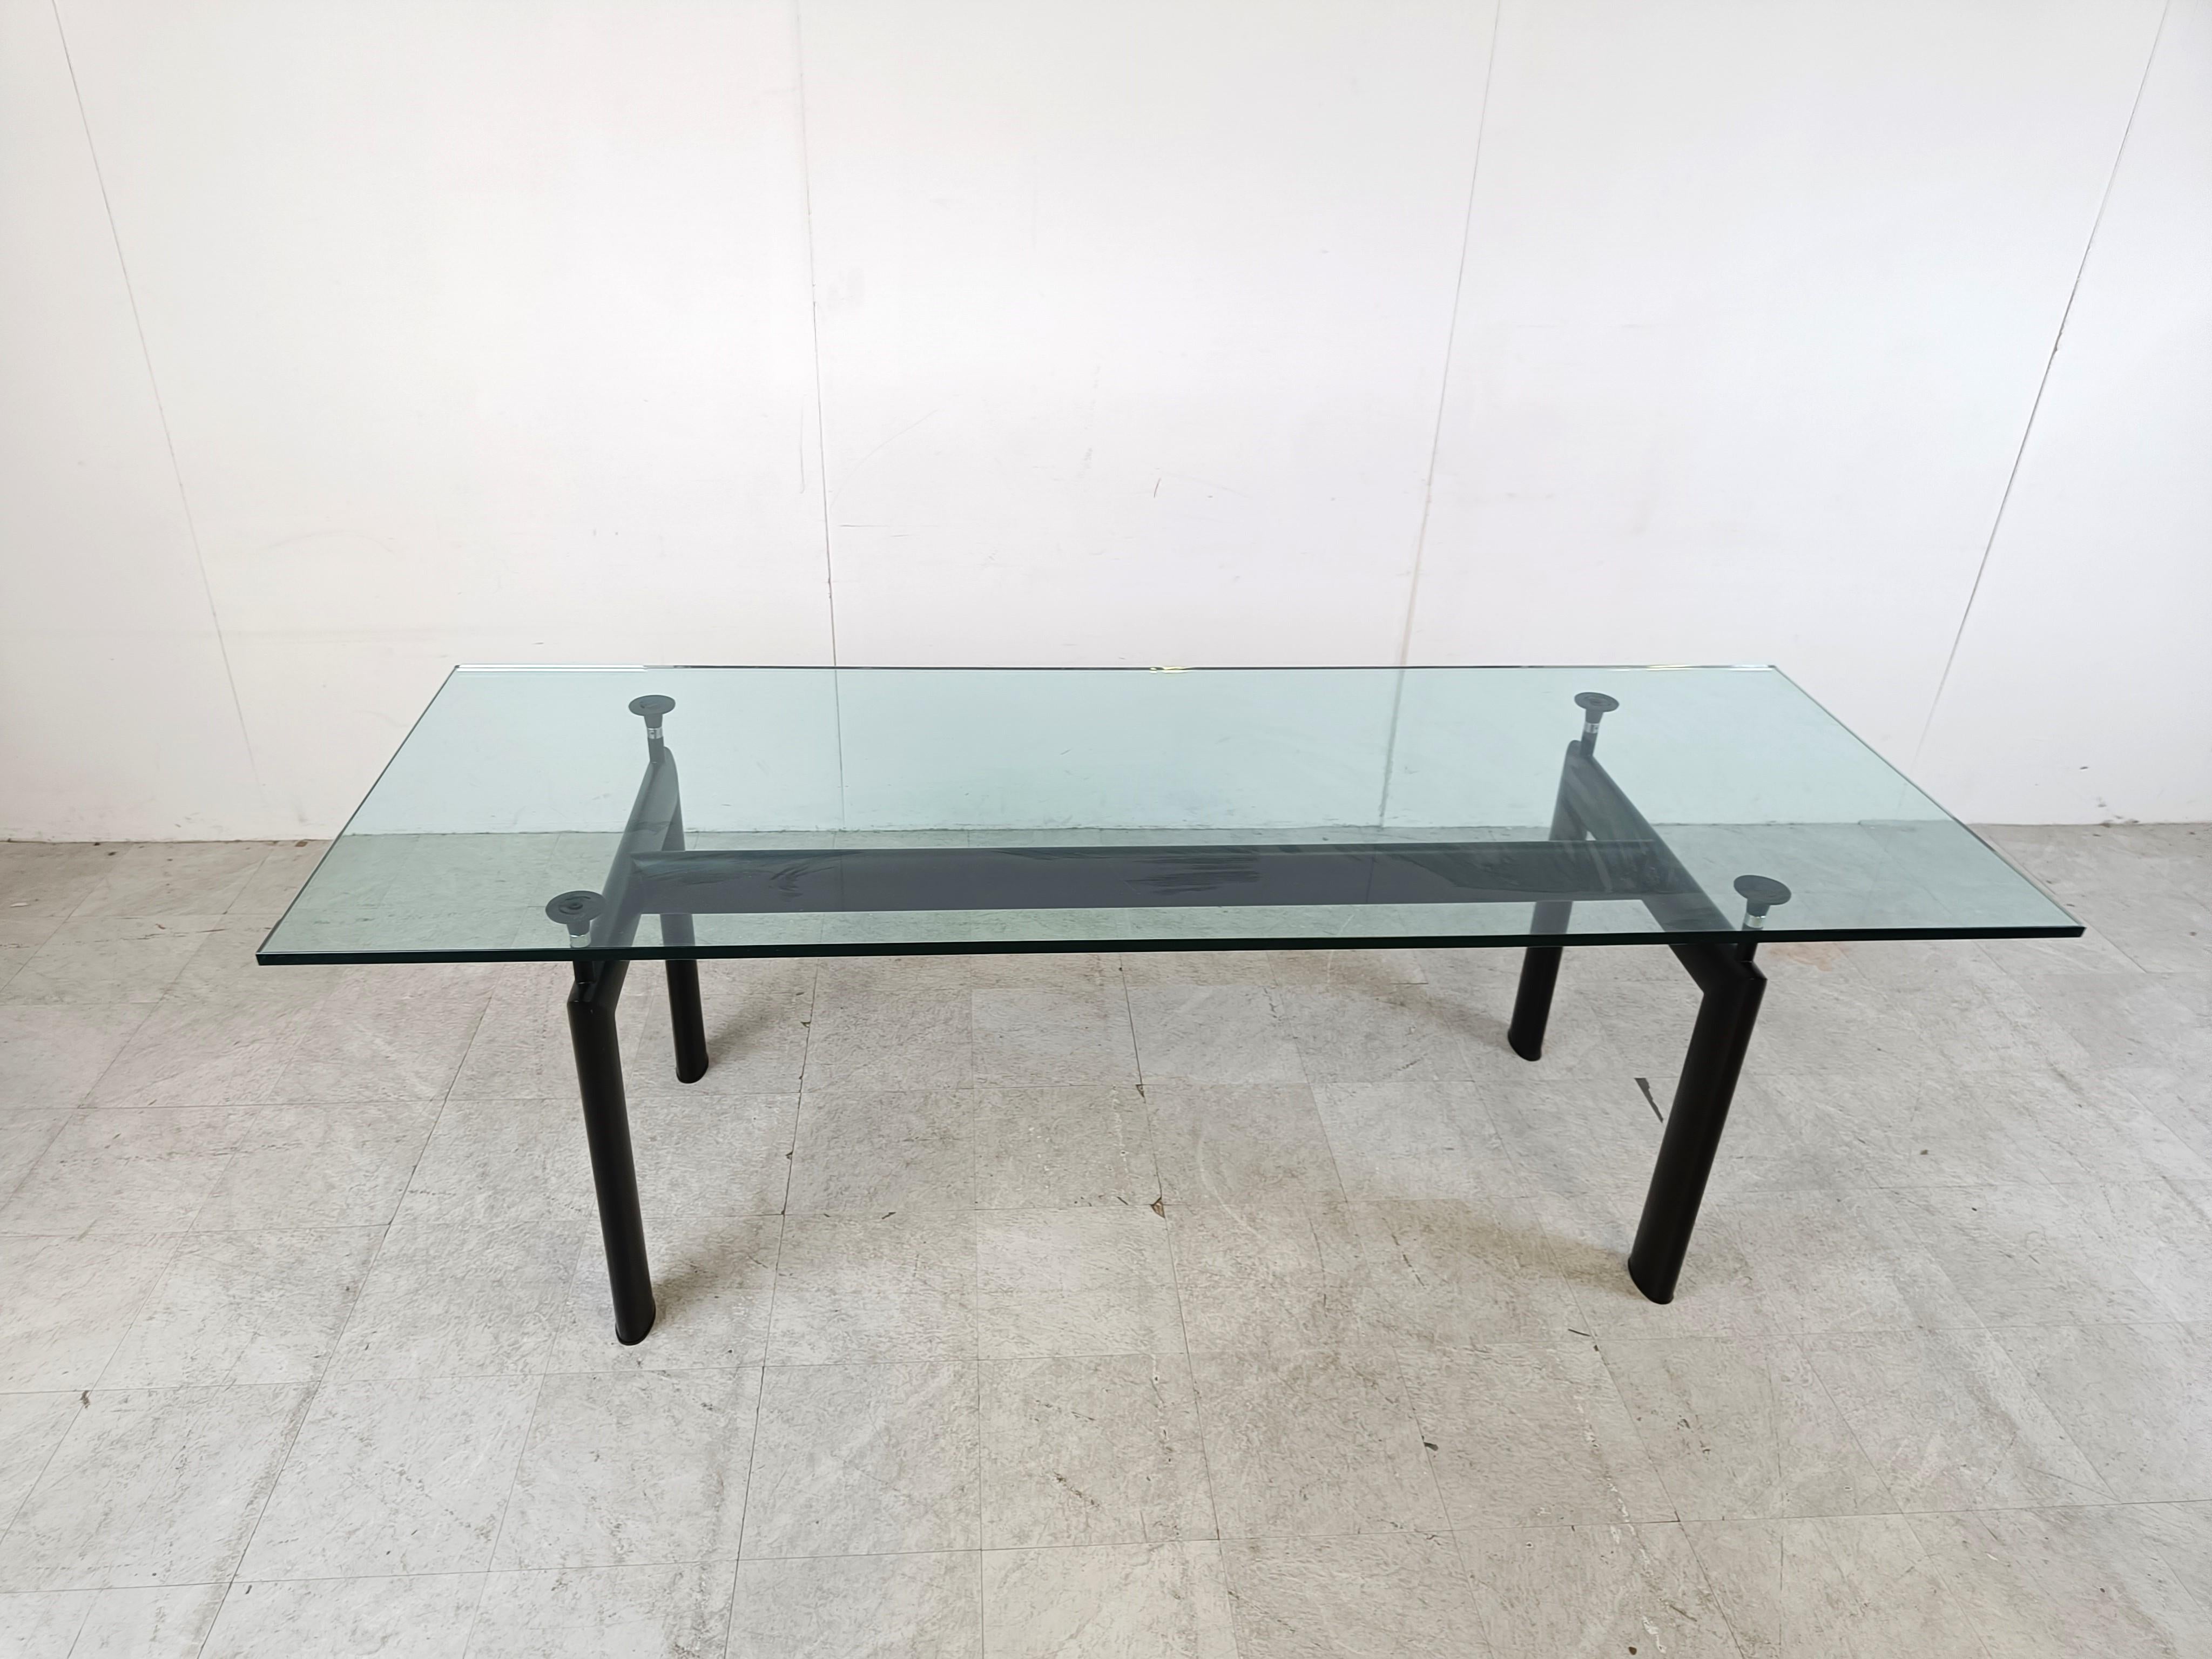 Dining table designed by Le Corbusier, Pierre Jeanneret, Charlotte Perriand originally in 1928 for the Salon d’Automne in Paris and relaunched in 1974 by Cassina.

It features a black aluminum base with 4 adjustable supports which make the table top